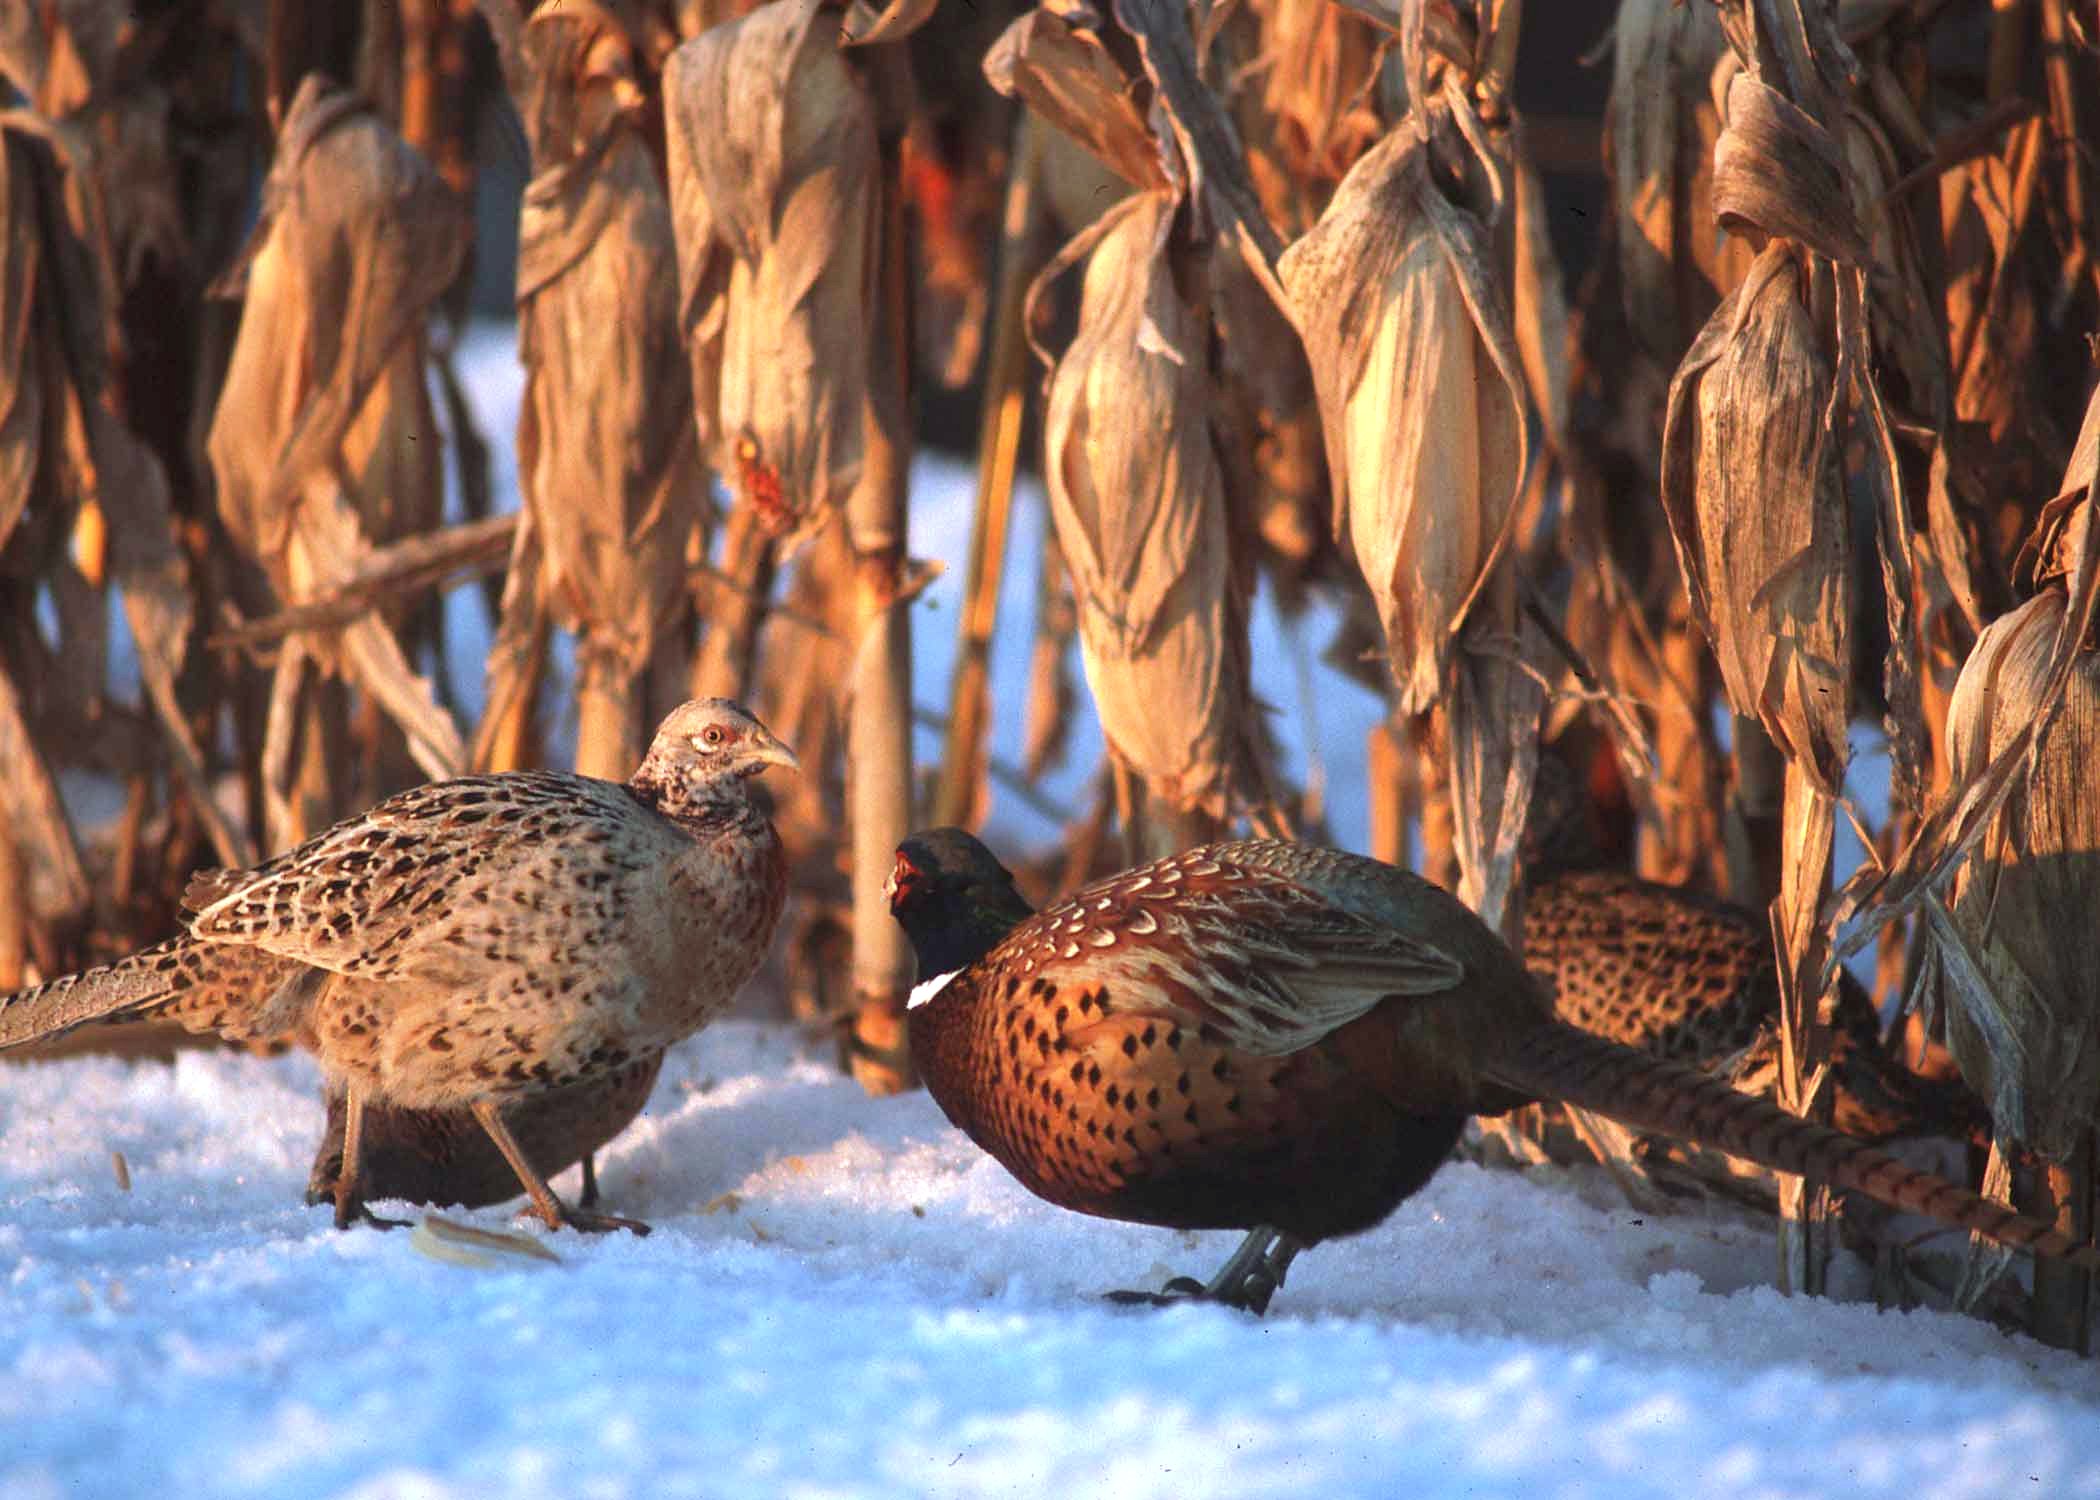 A pair of pheasants in a cornfield, winter